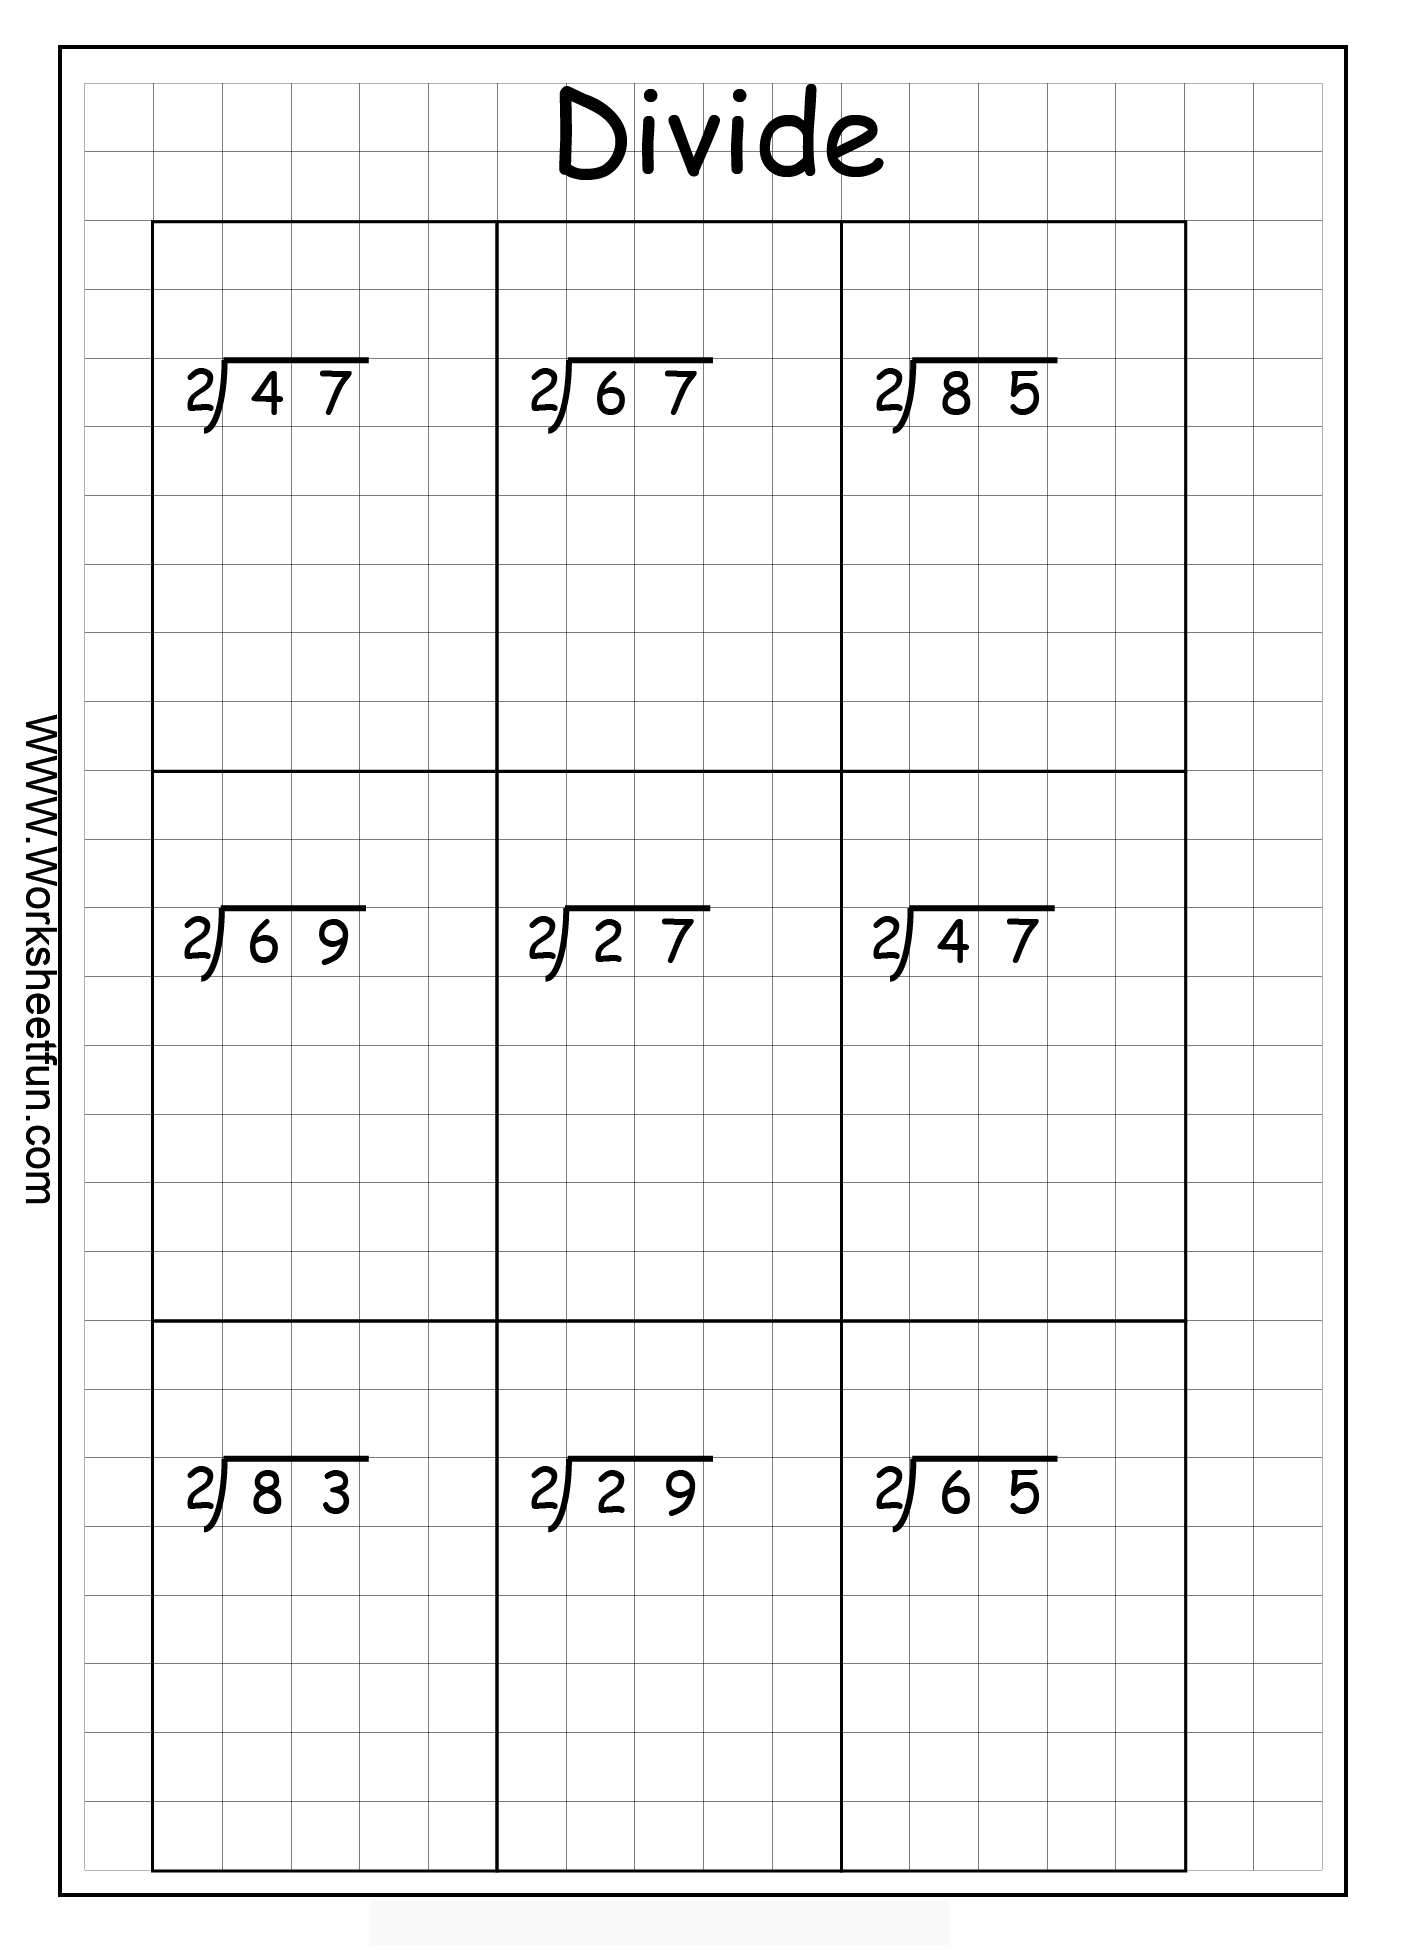 Long Division Worksheets by 2 Image